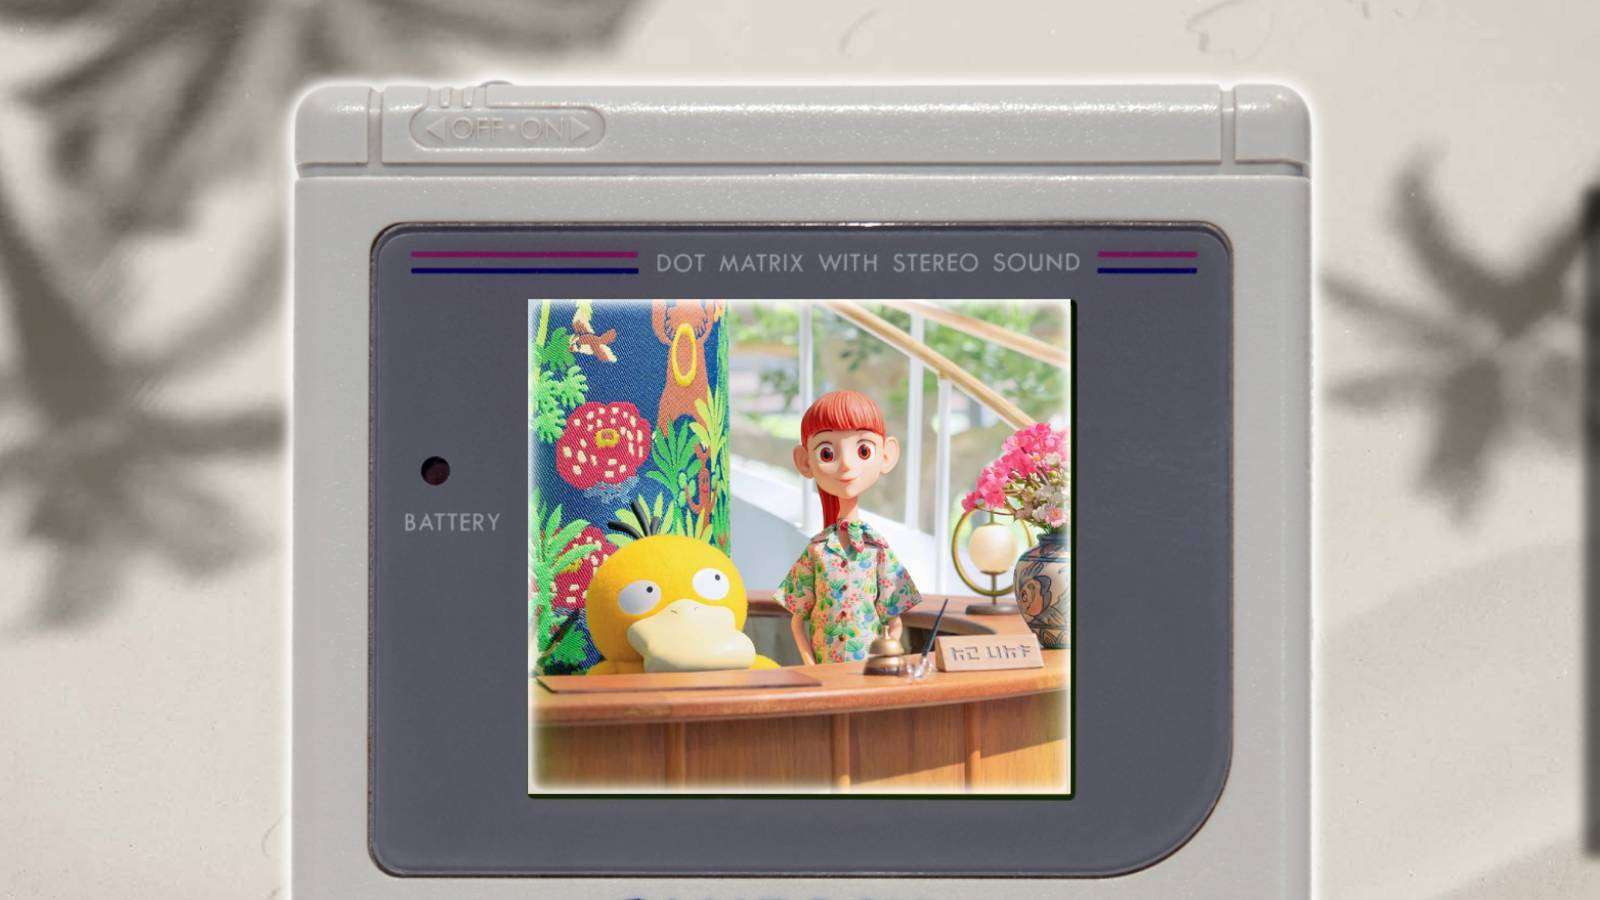 A Game Boy is visible, with key art for Pokemon Concierge pictured on the screen